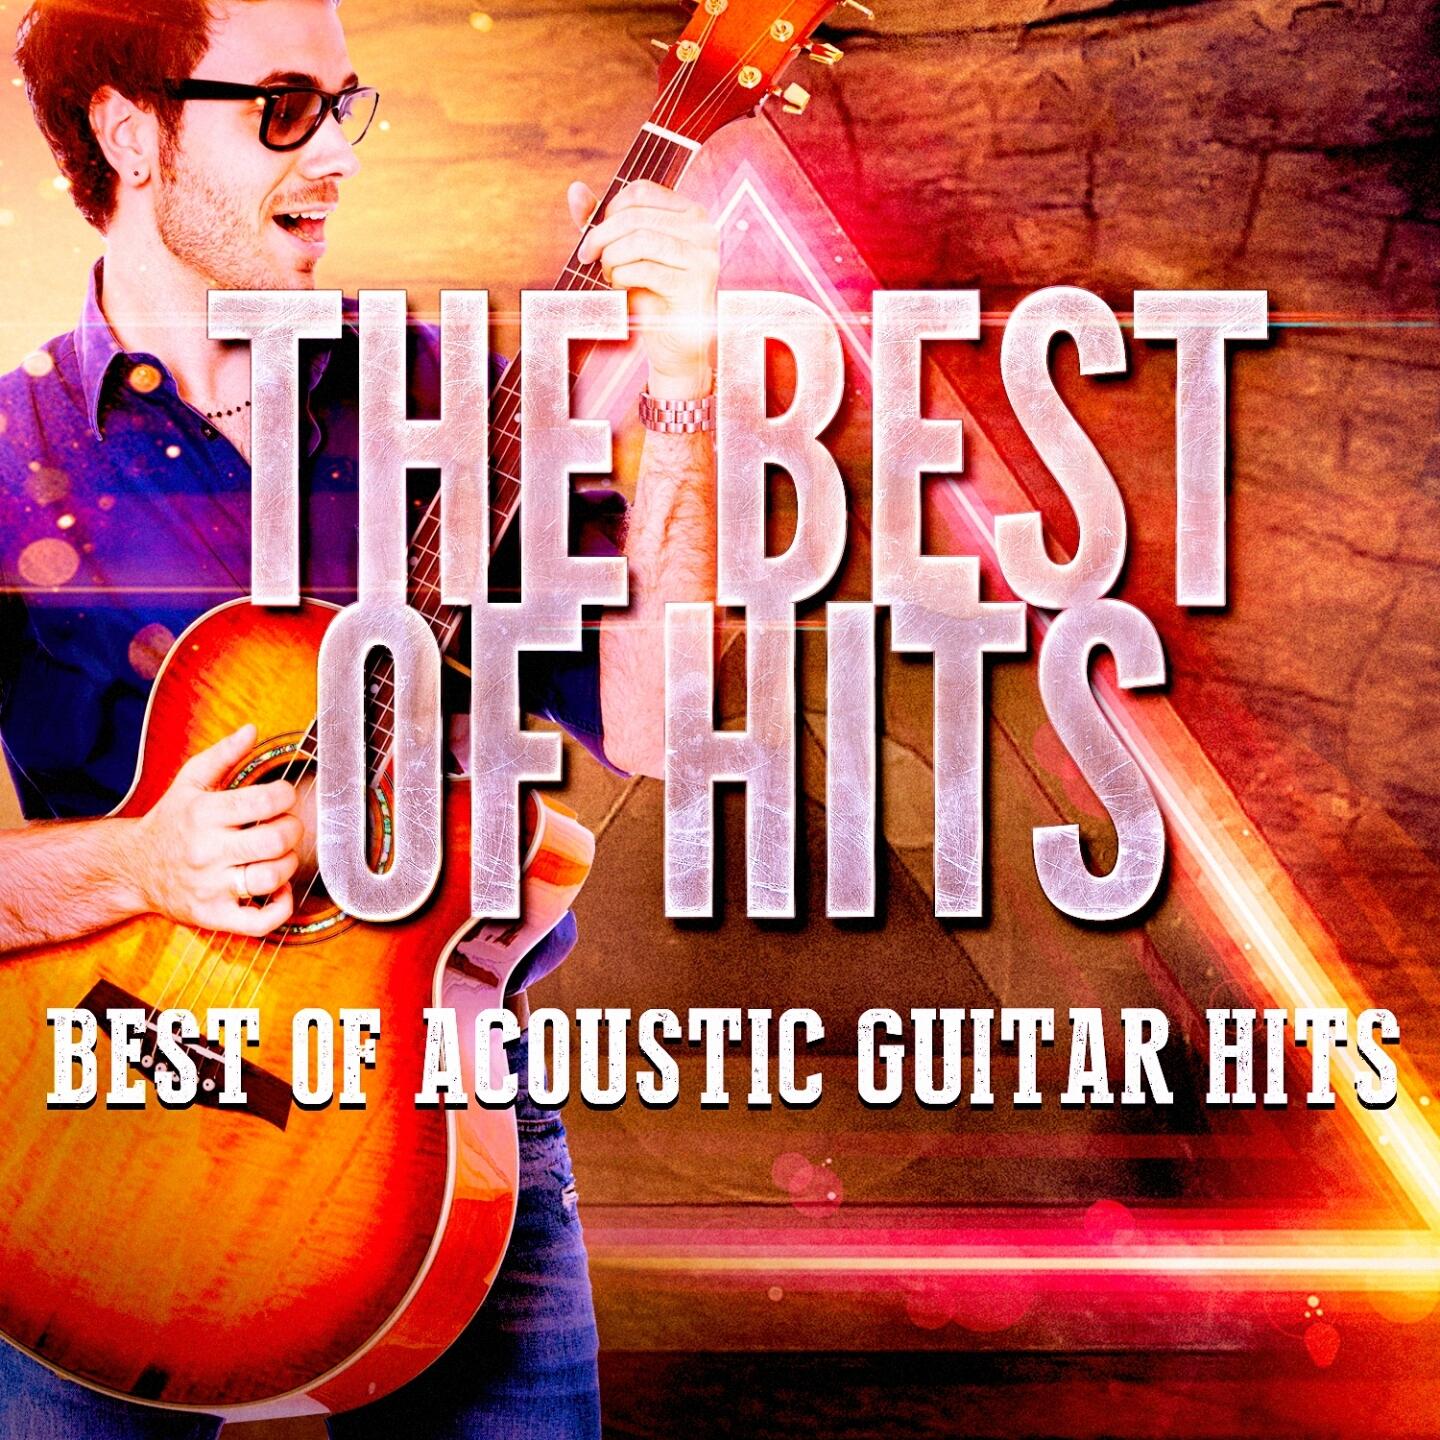 Acoustic Guitar Best of Acoustic Guitar Hits iHeart